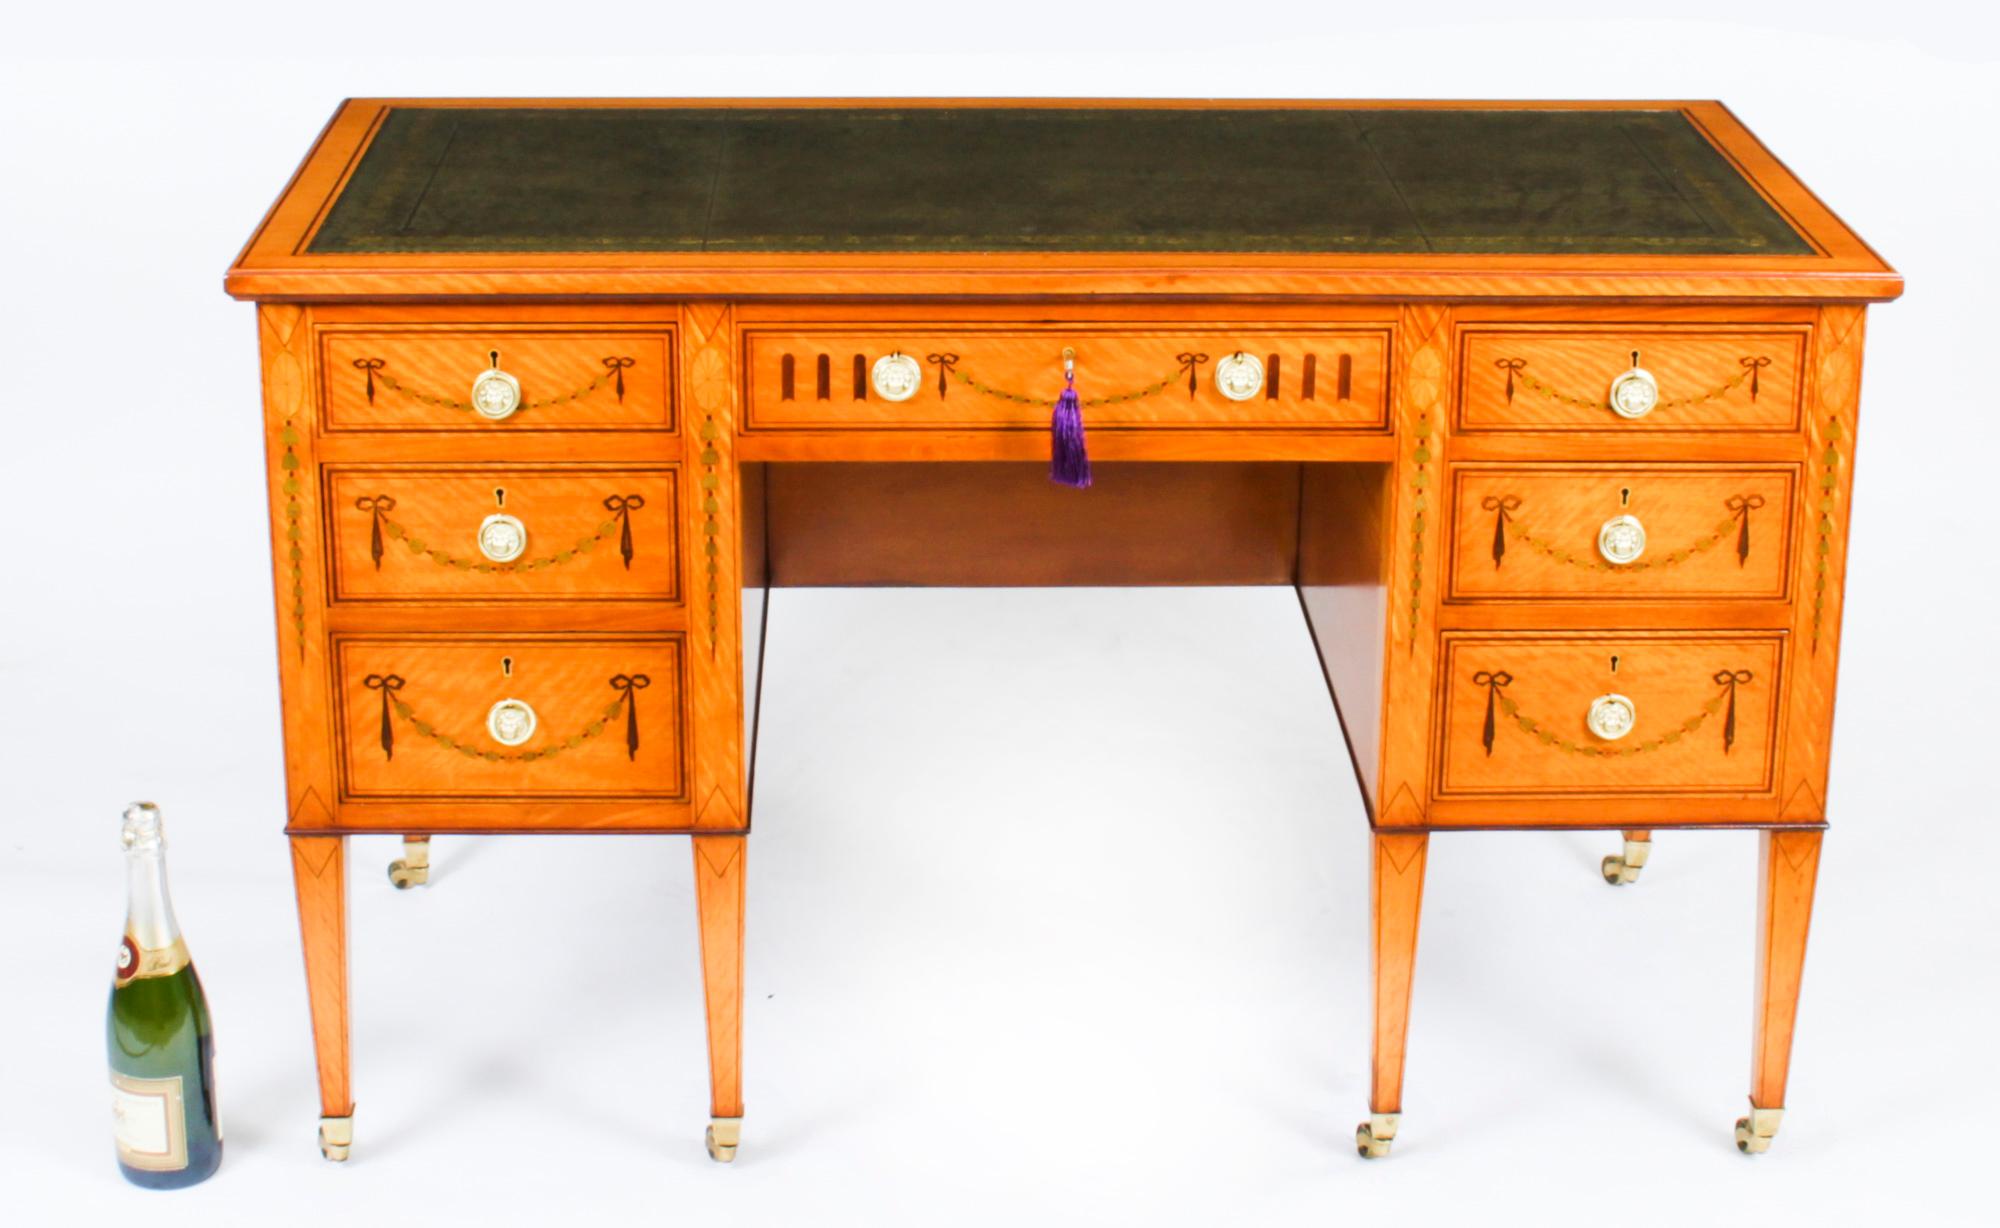 Antique Inlaid Satinwood Writing Table Desk by Edwards & Roberts, 19th Century For Sale 13